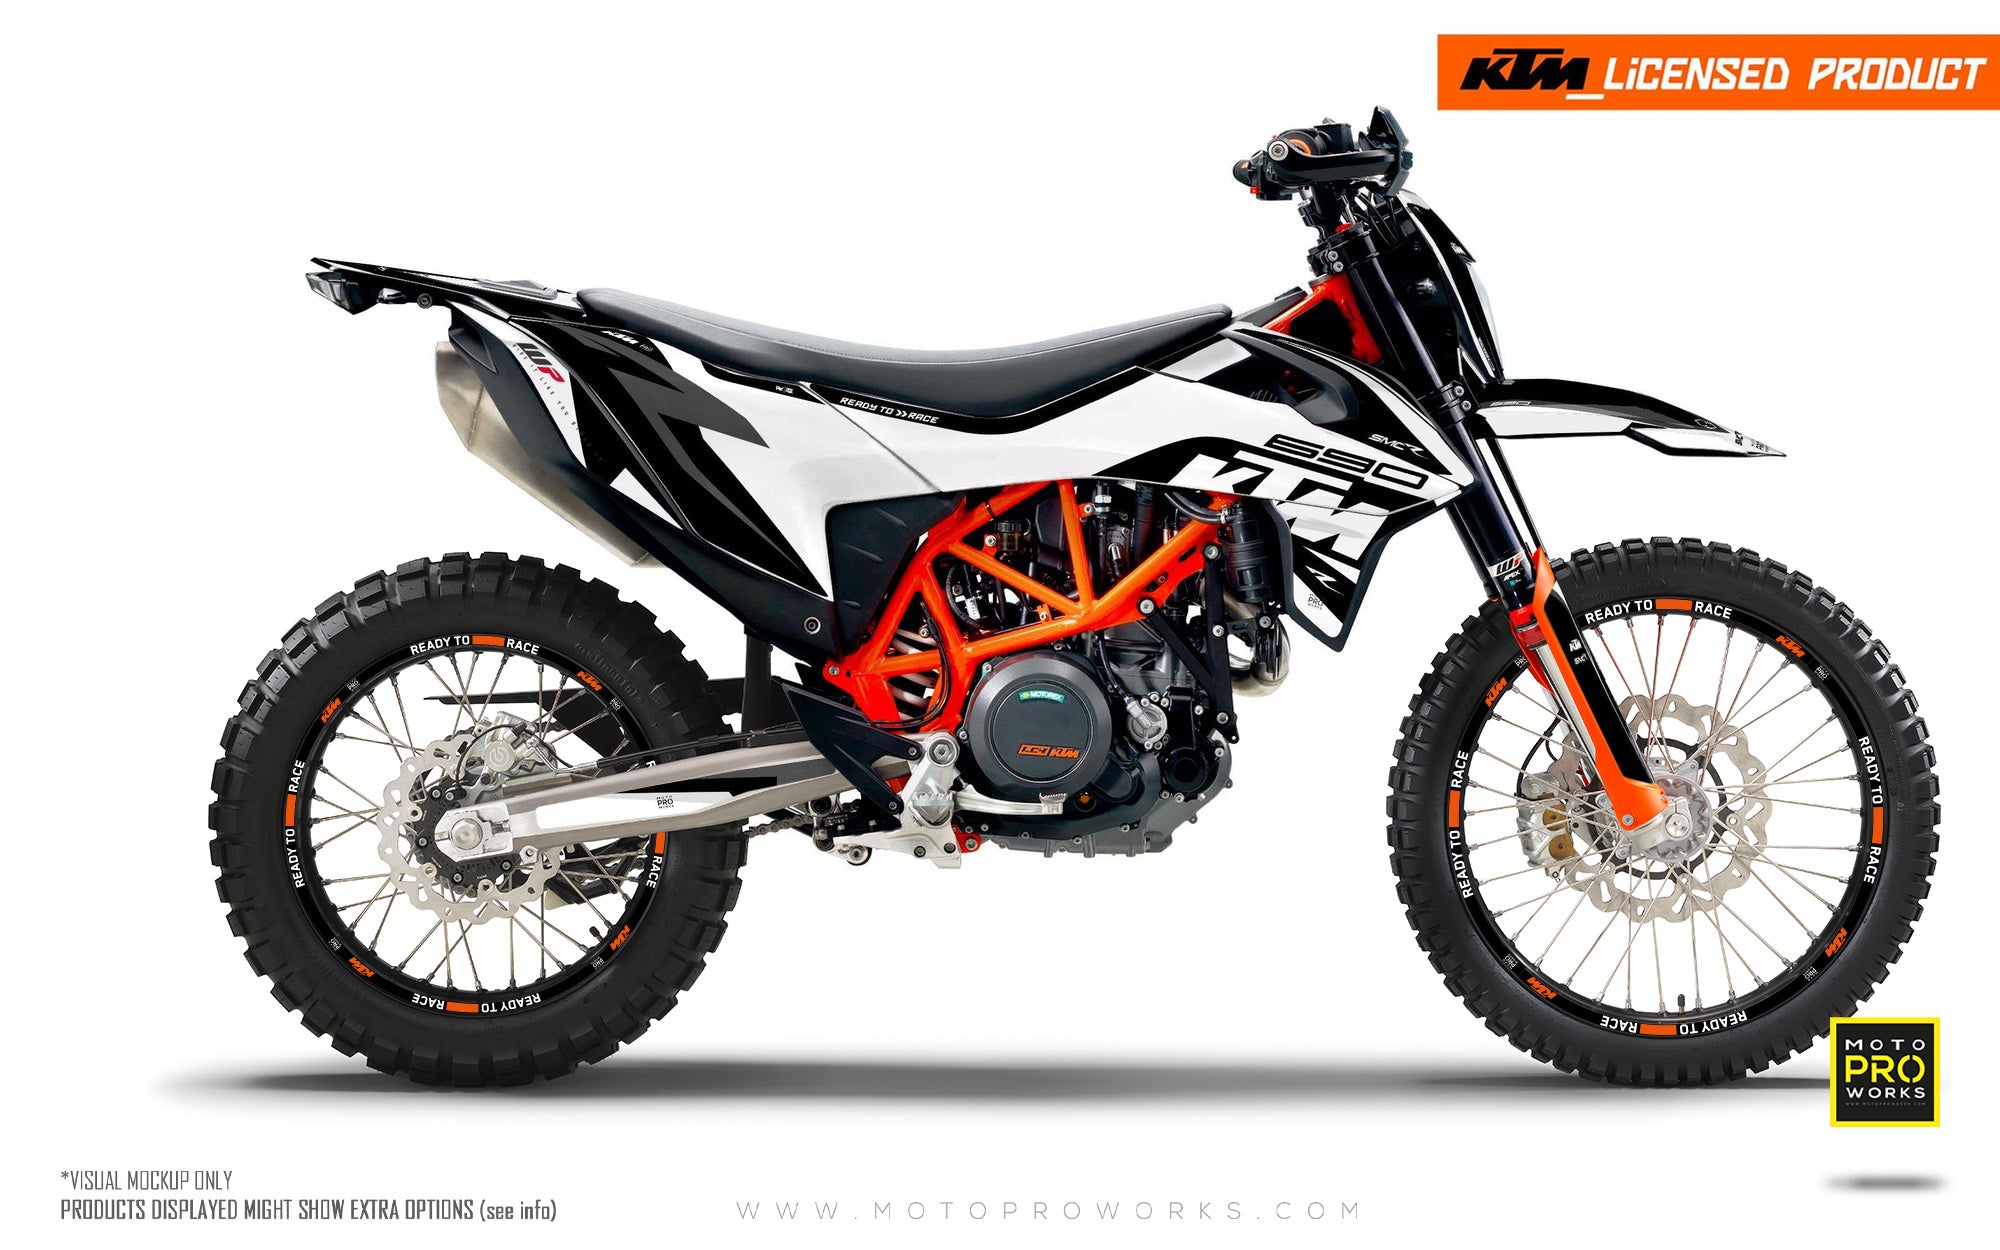 KTM GRAPHIC KIT - "Torque" (White/Black) - MotoProWorks | Decals and Bike Graphic kit